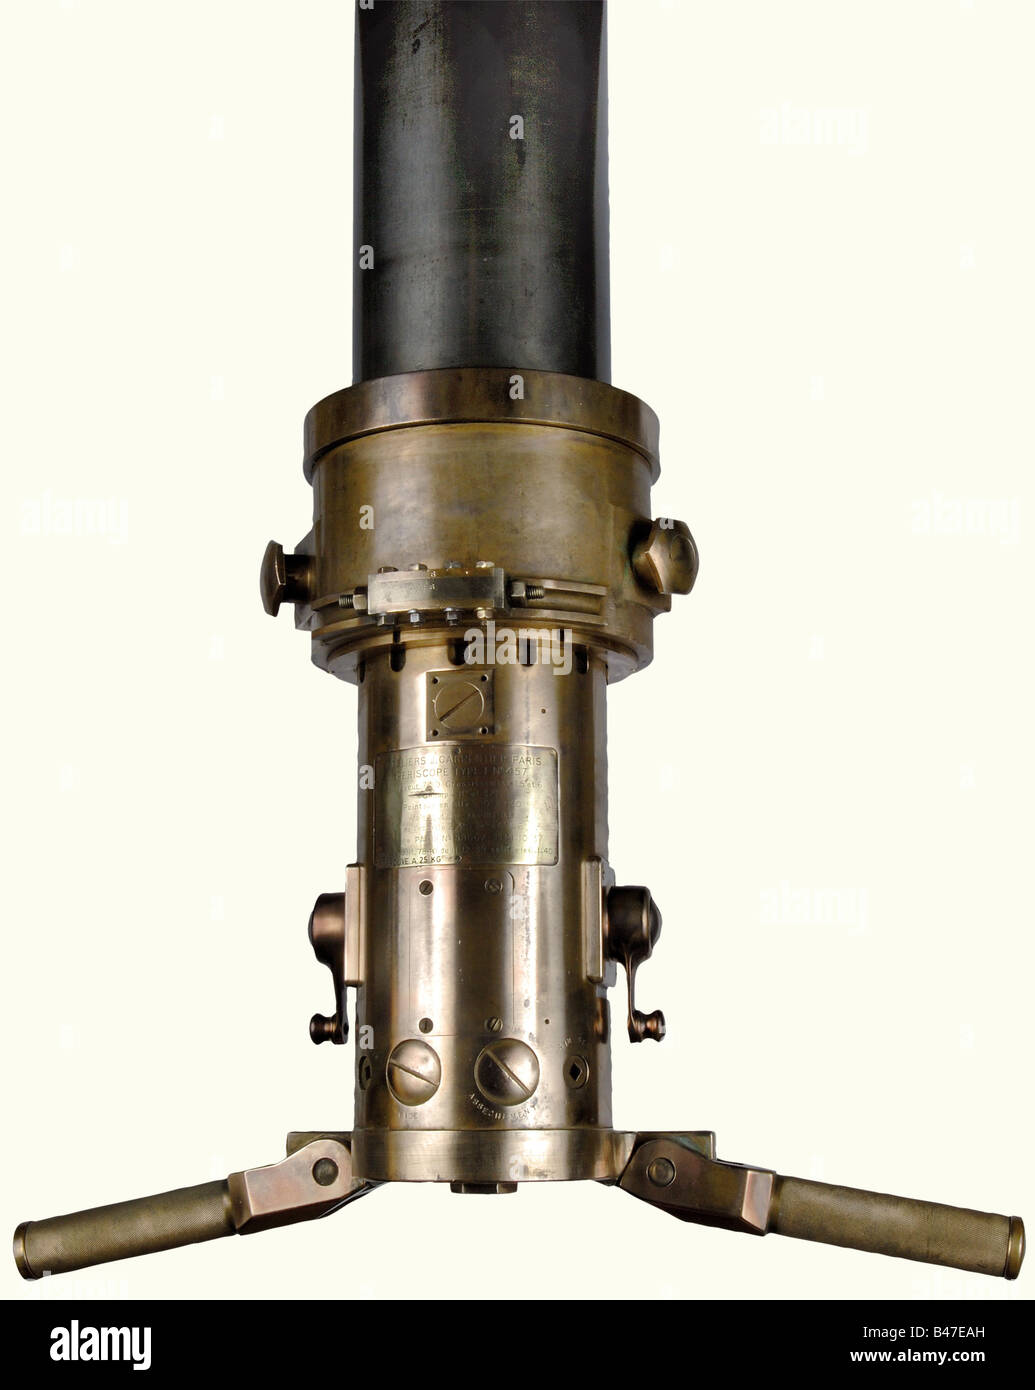 A periscope for a French submarine, model F, No. 457 Steel and bronze. Length 7.77 meters. Diameter 160 mm. Weight 350 kg. The autofocus optics are in perfect condition. Angle of traverse between -10ø and +30ø. 1.5 and 6 x magnification. The lever for the 6x magnification needs repair. Engraved manufacturer's plate, 'Ateliers J. Carpentier Paris - Periscope Type F No. 457 - Longeur 7,50 - Grossissement 1,5 et 6 - Champ = 8ø et 32ø - Pointage en site -10ø to +30ø. - Valeur d'une graduation de l'echelle 2/20 deø a Gr = 6'. (Length 7.50. magnifications 1.5 and 6. , Stock Photo